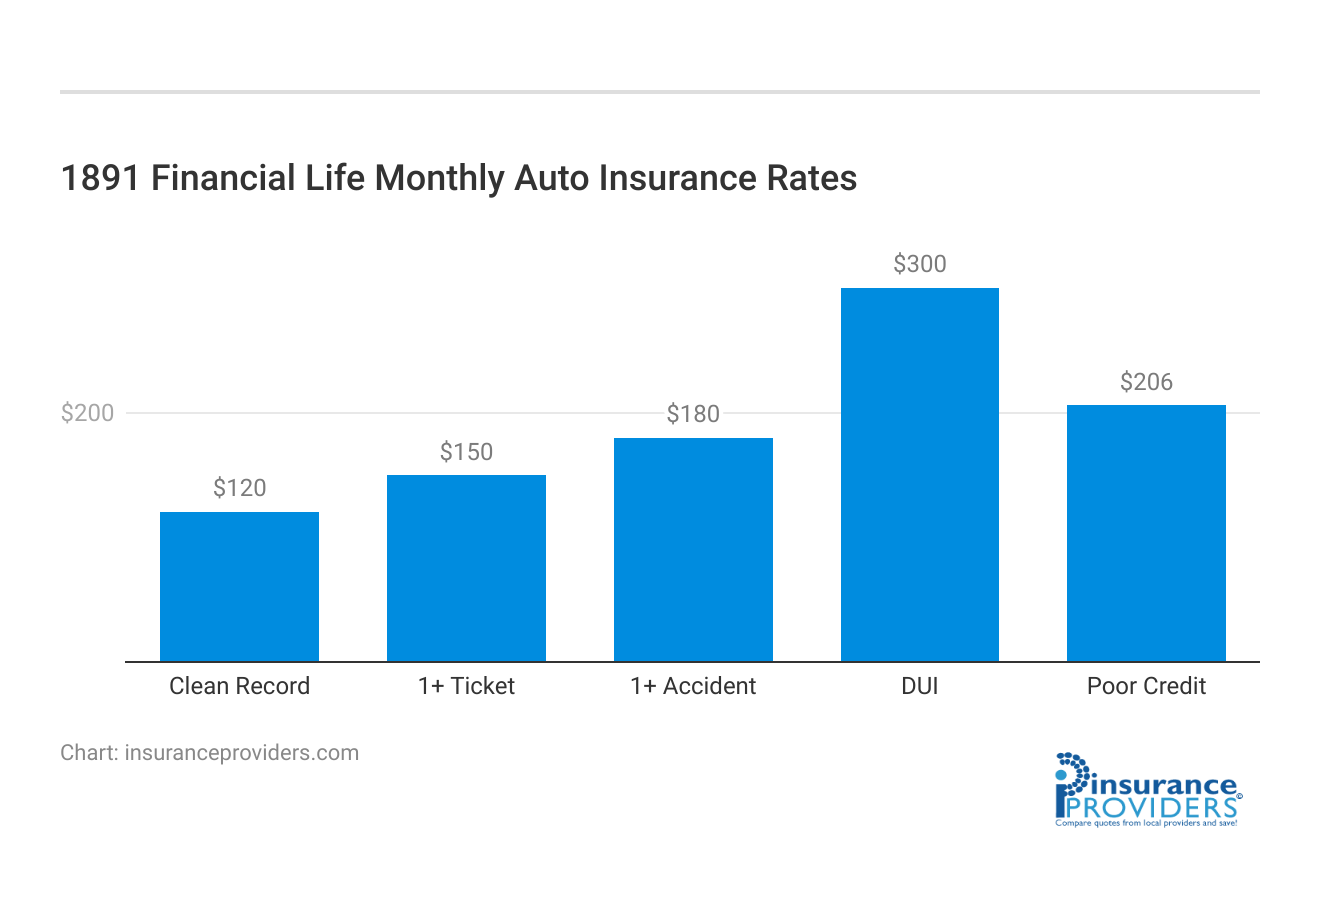 <h3>1891 Financial Life Monthly Auto Insurance Rates</h3>